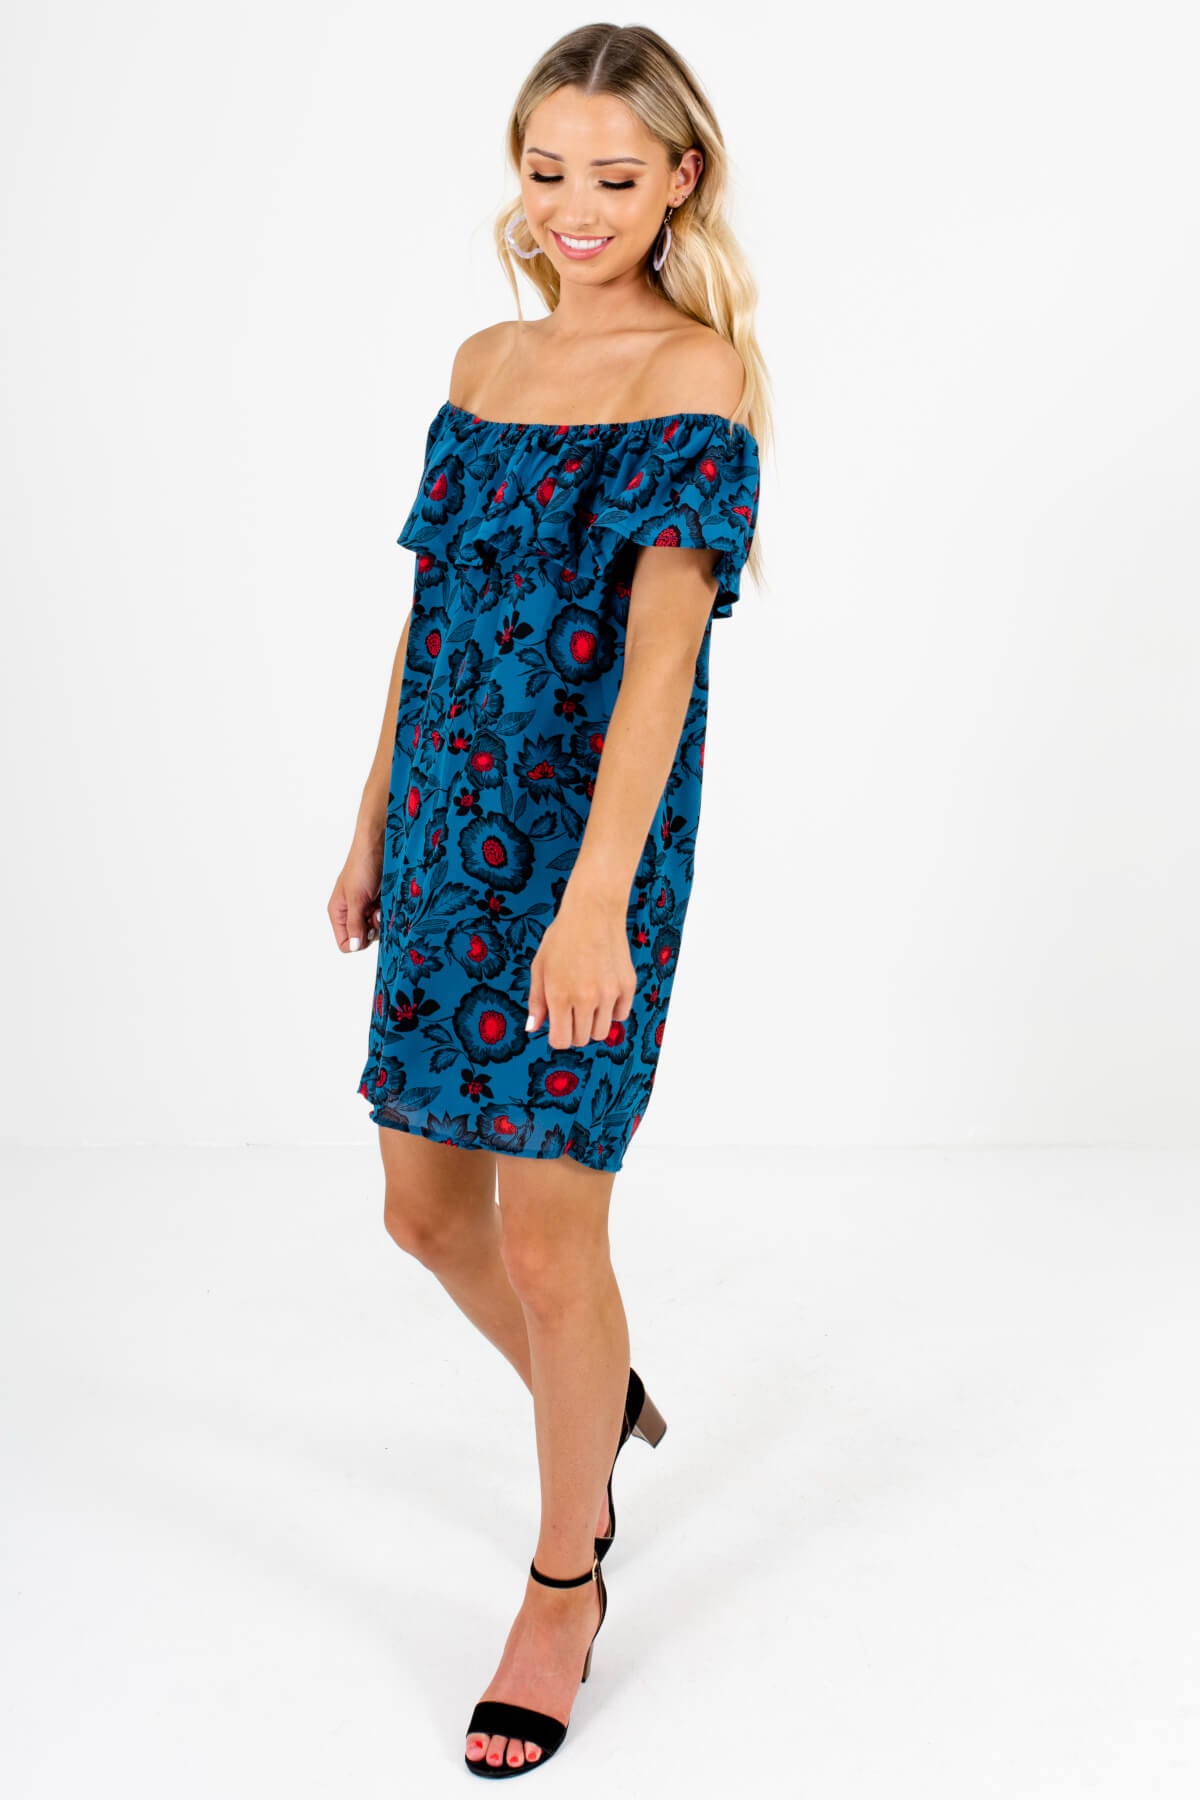 Teal Blue Floral Cute and Comfortable Boutique Mini Dresses for Women